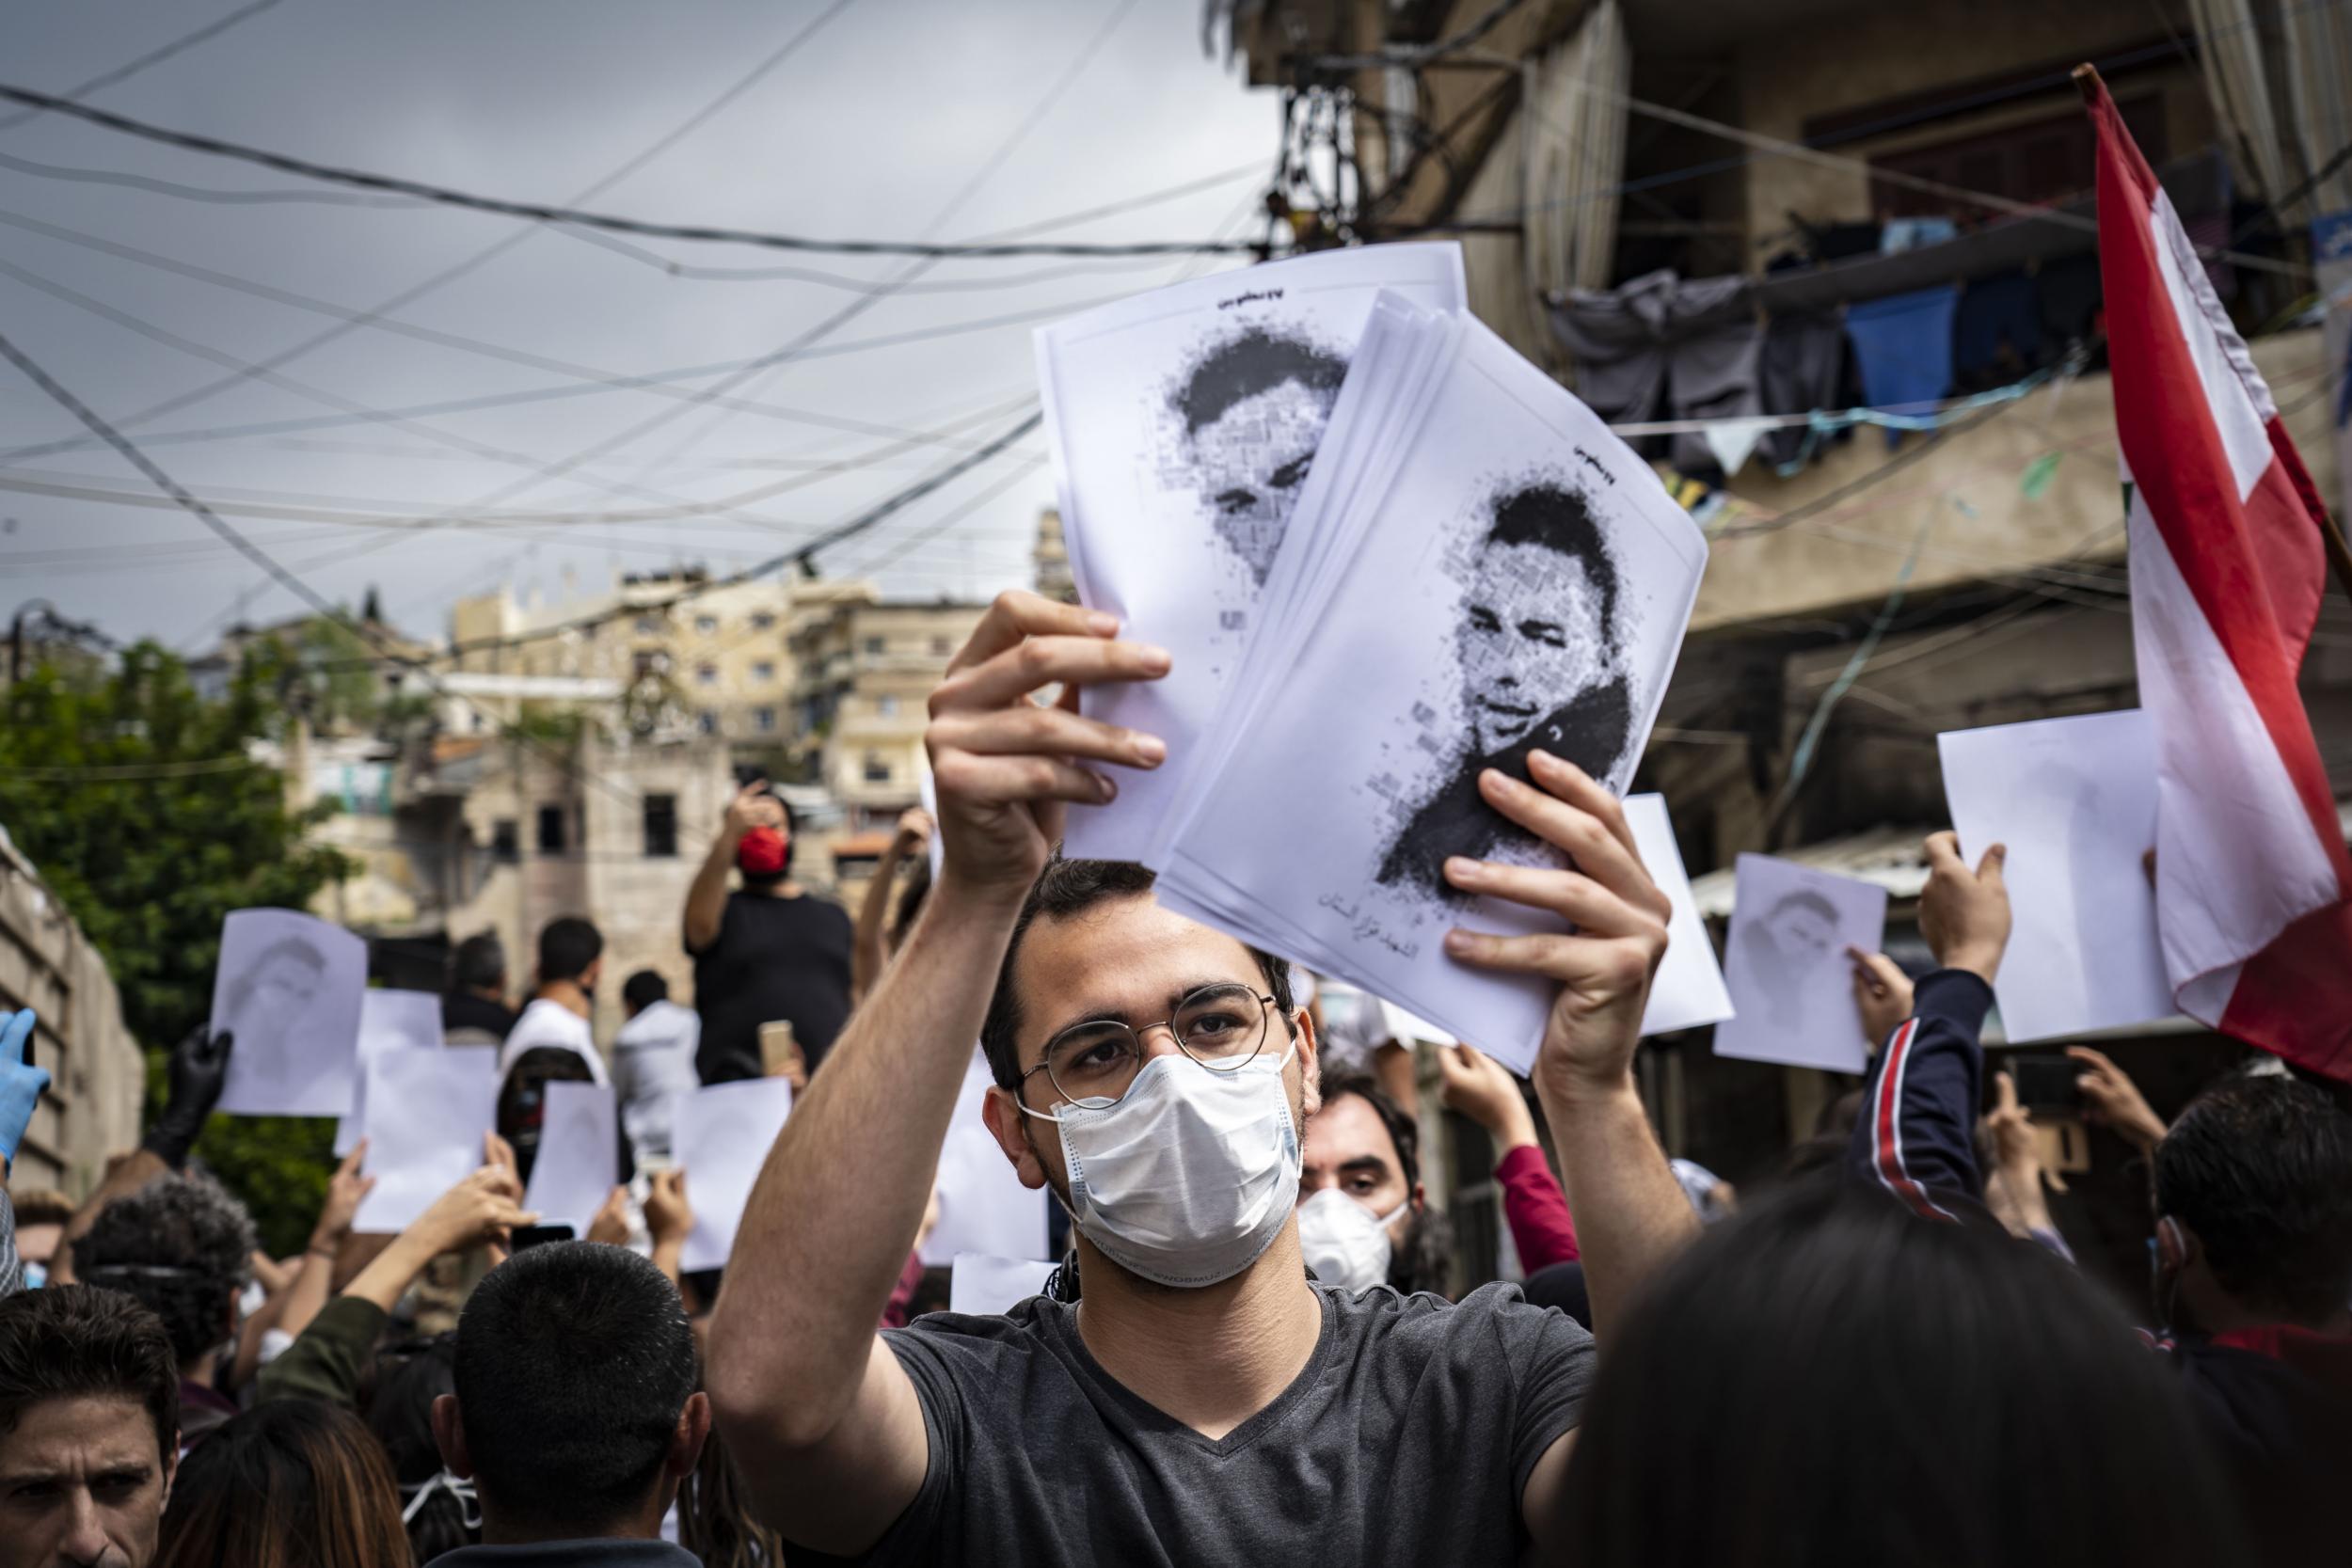 Protesters hold up the image of Fawwaz Fouad al-Seman, a 26-year-old protester killed by security forces last month in Tripoli